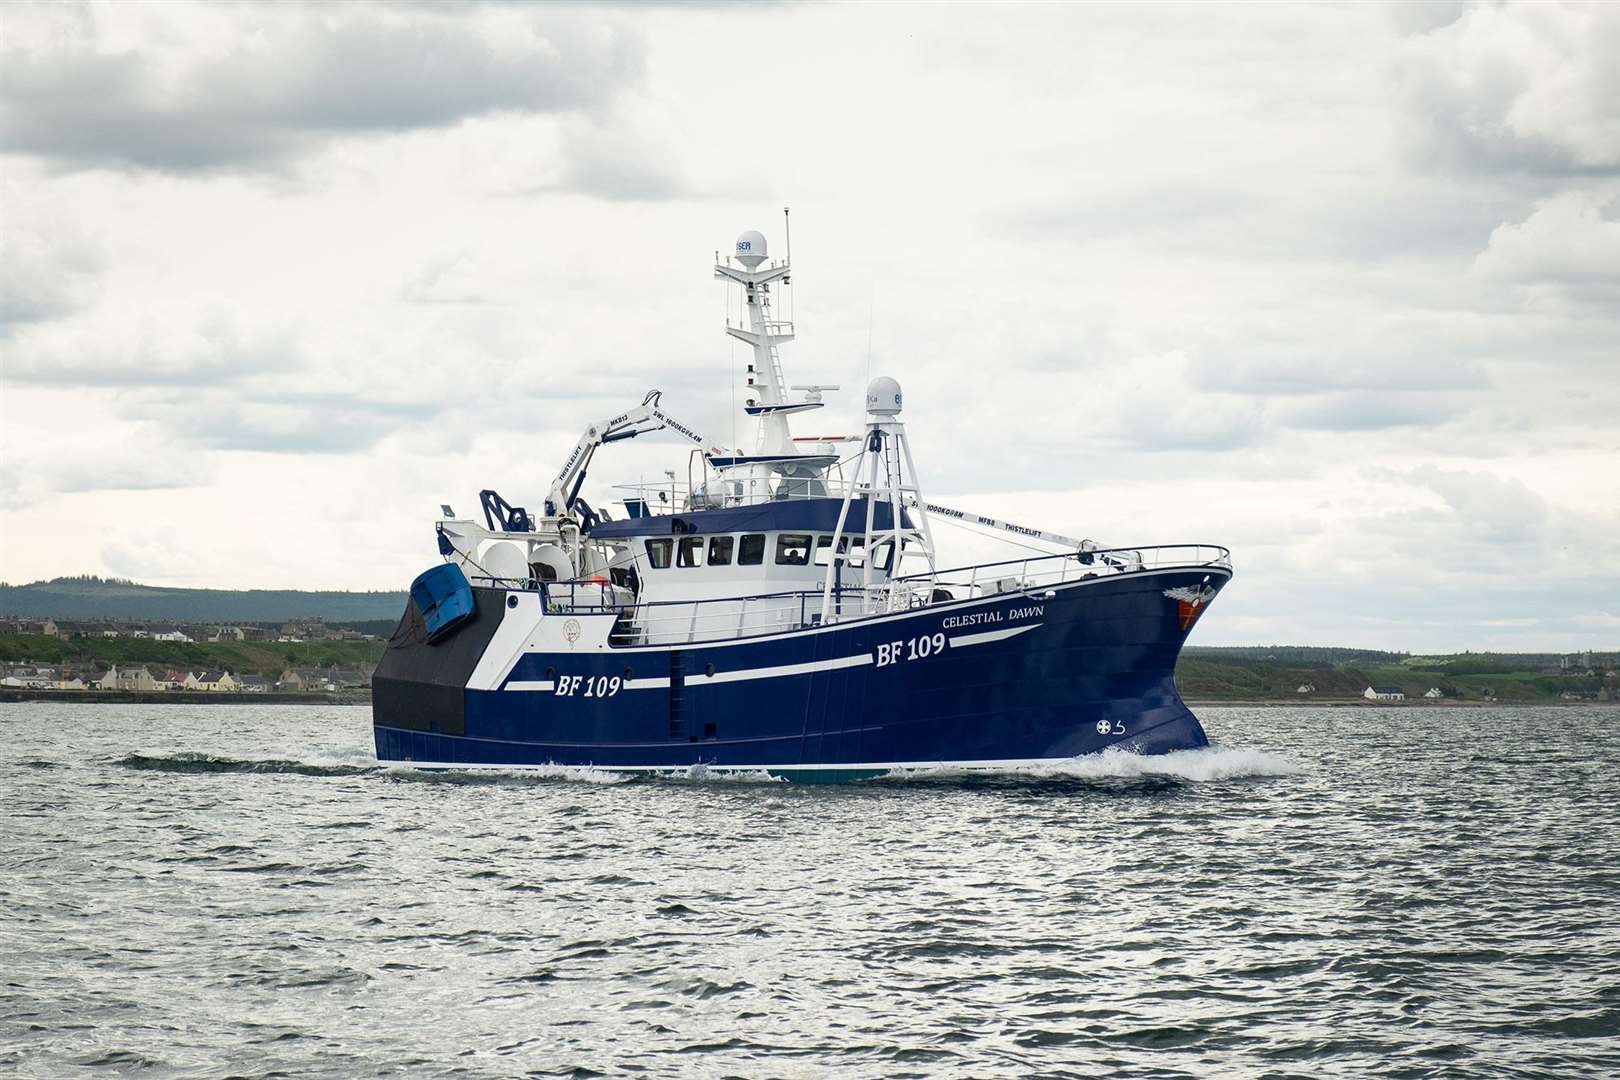 The Celestial Dawn is one of three sister boats designed by the MacDuff firm, all three will be built in Buckie.